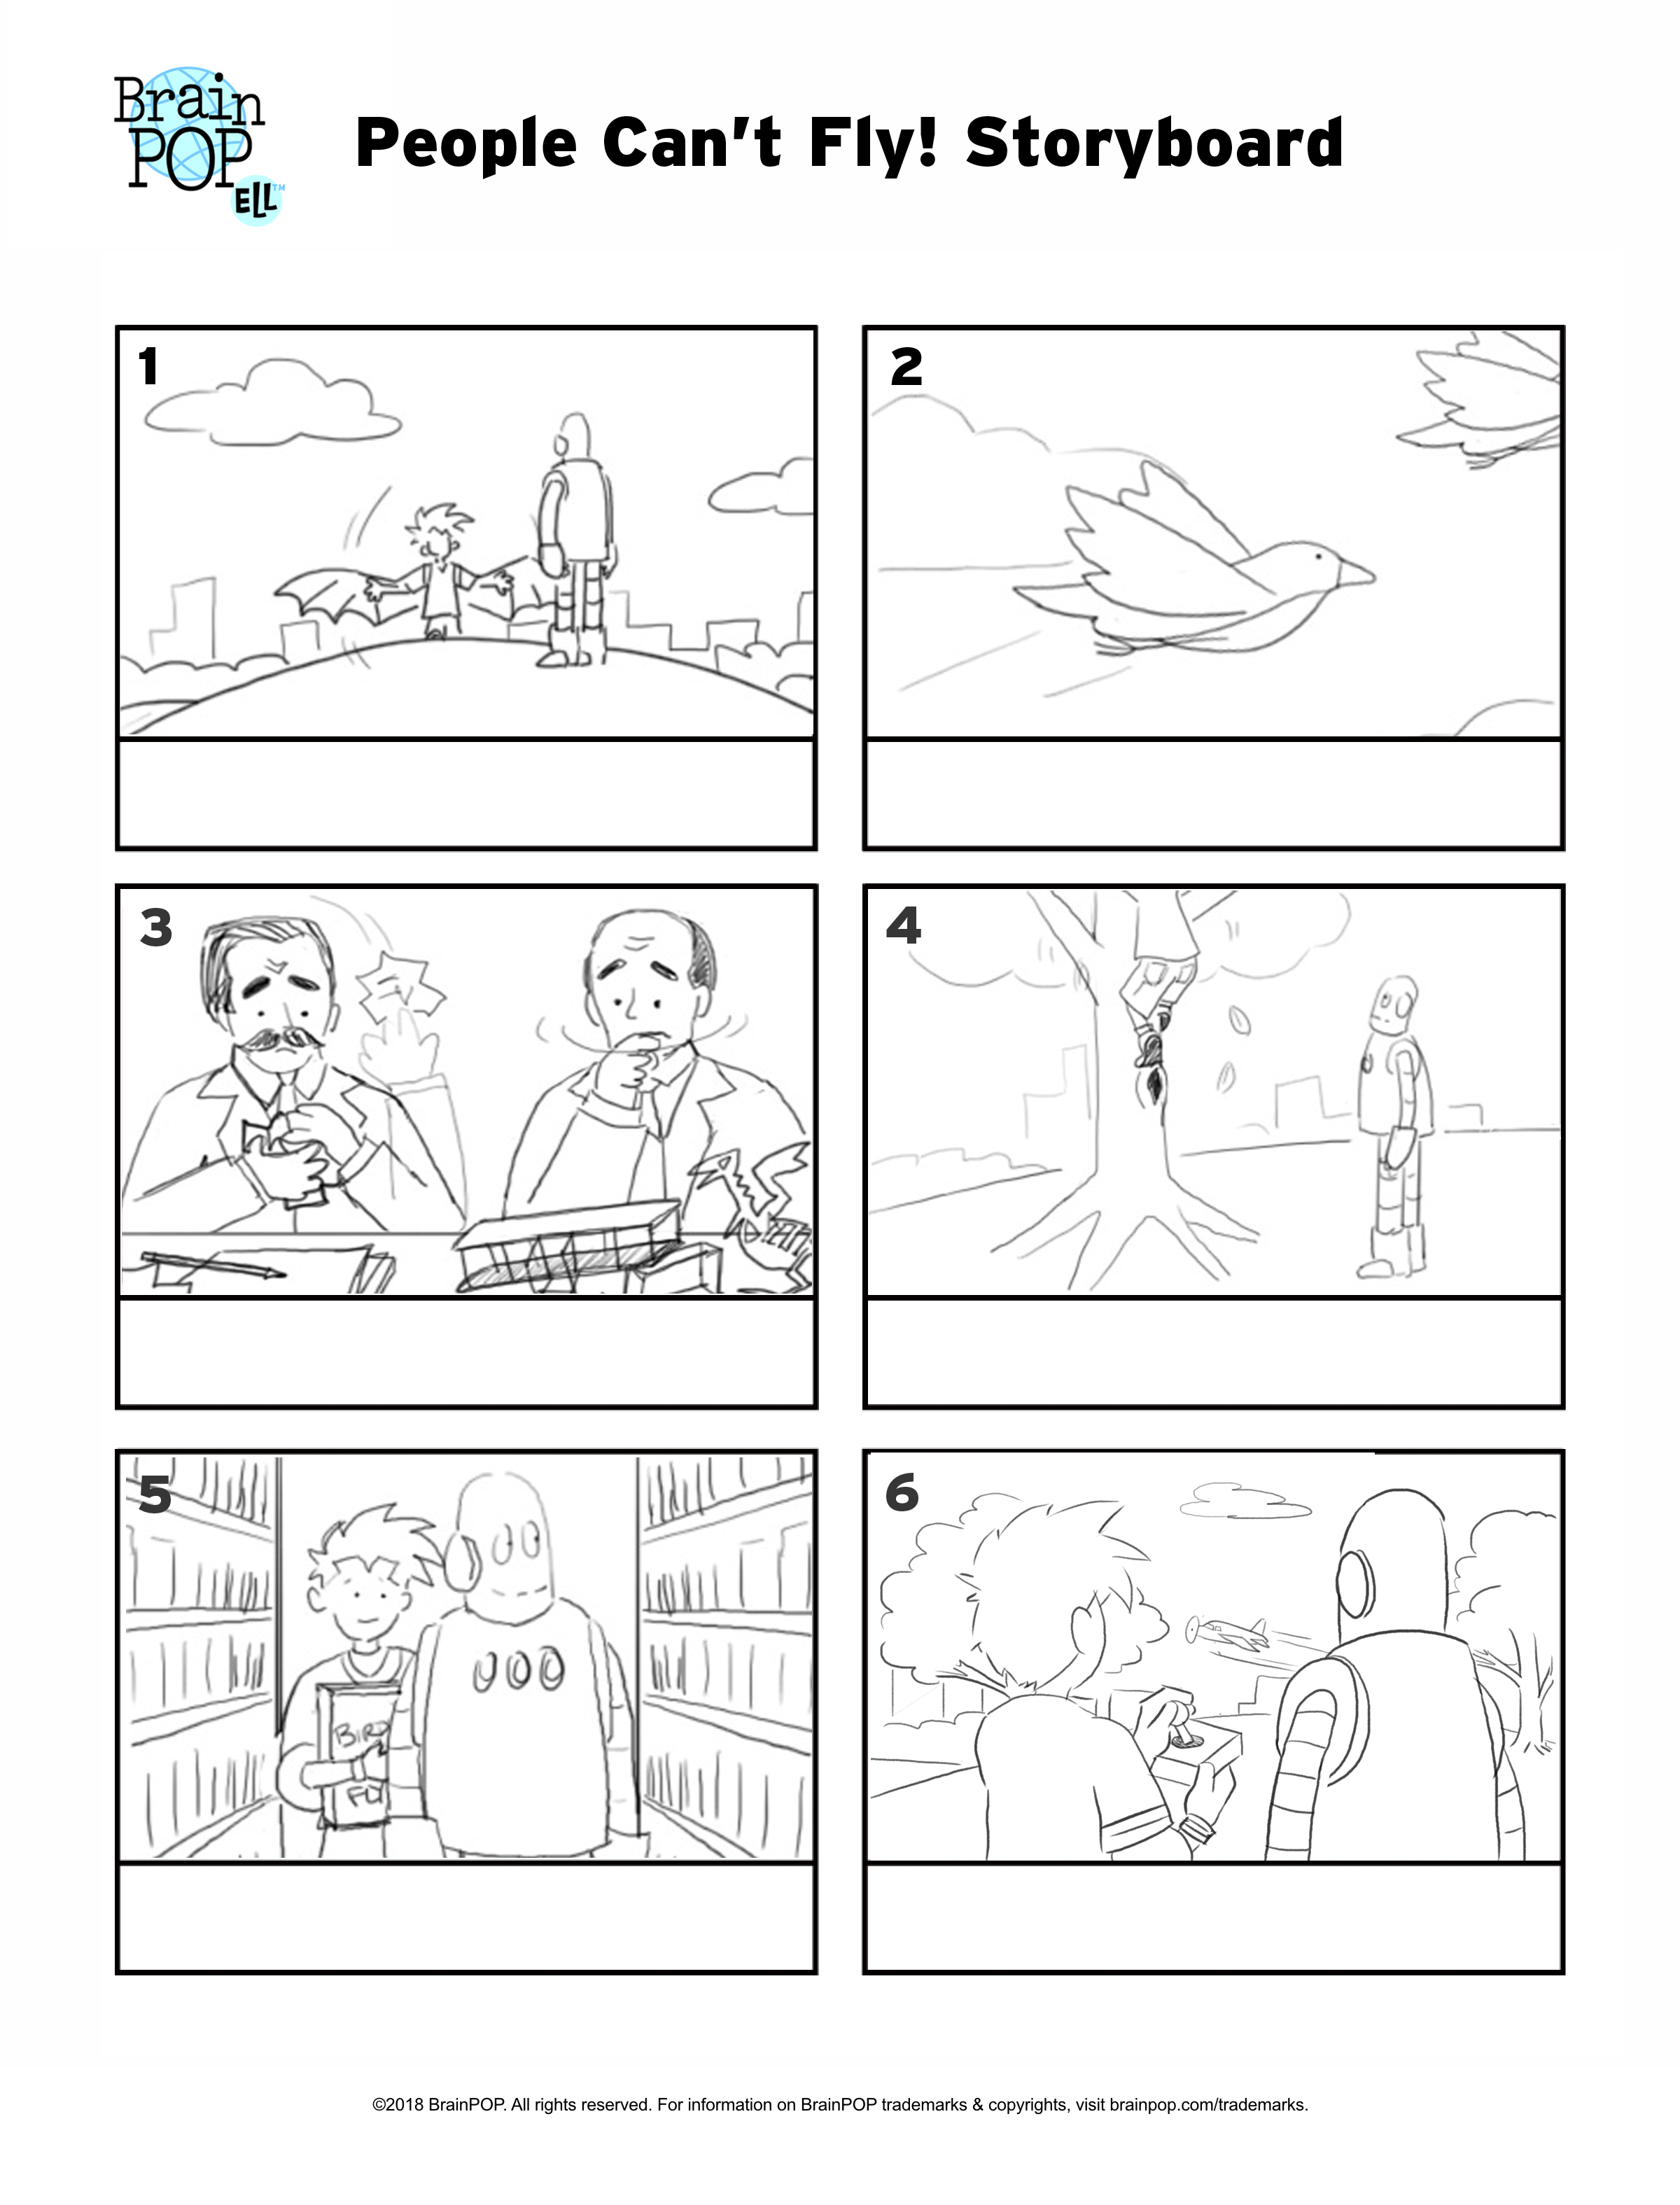 People Can’t Fly Storyboard Sequencing Activity